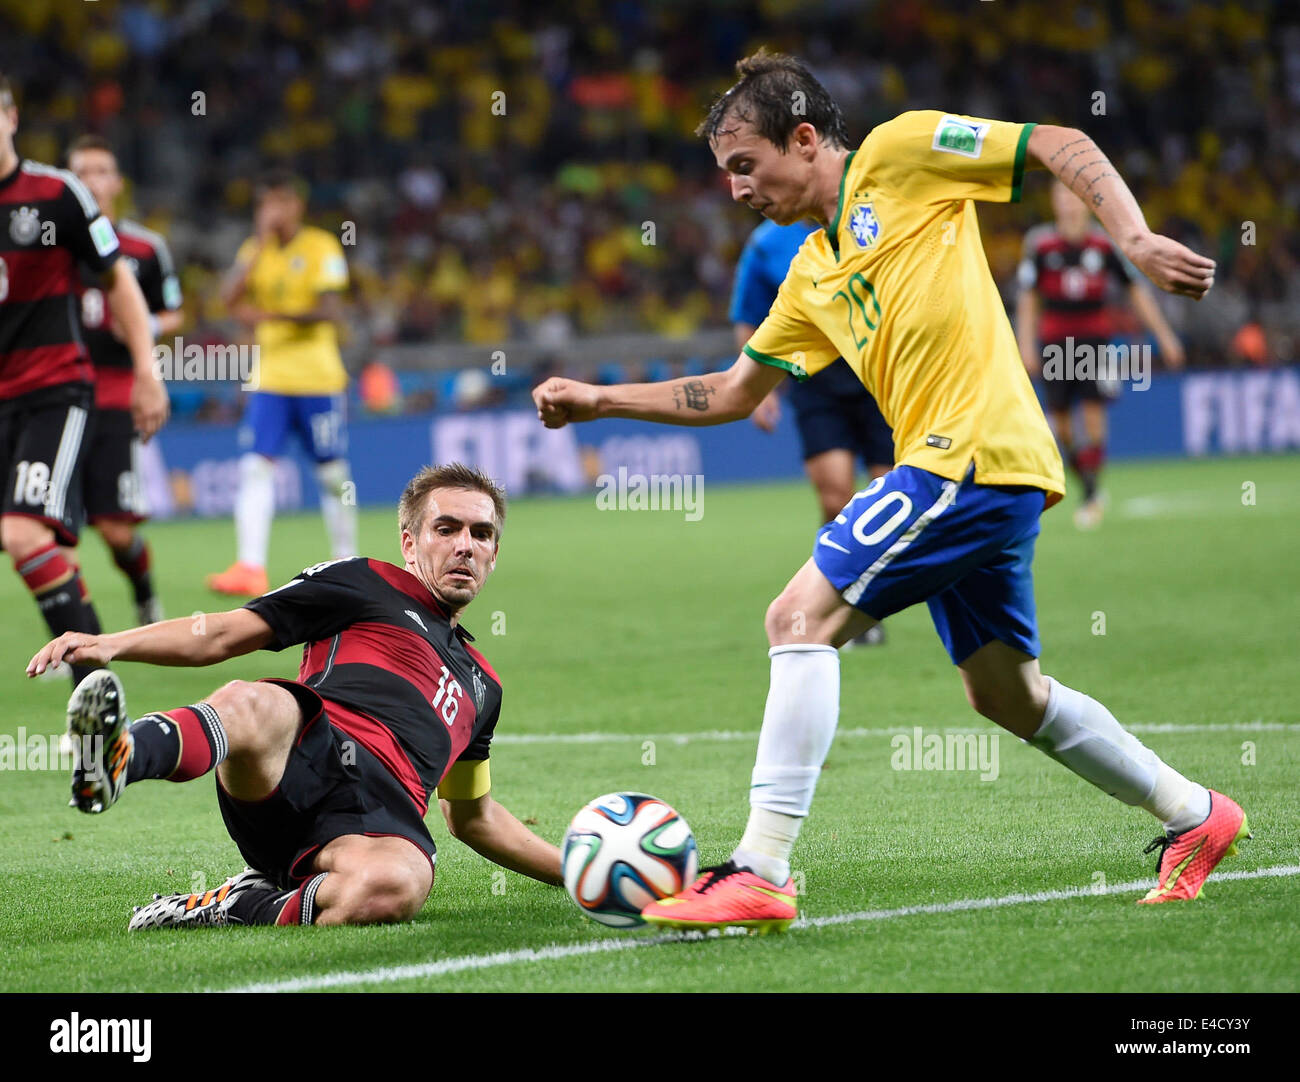 Belo Horizonte, Brazil. 8th July, 2014. Brazil's Bernard vies with Germany's Philipp Lahm during a semifinal match between Brazil and Germany of 2014 FIFA World Cup at the Estadio Mineirao Stadium in Belo Horizonte, Brazil, on July 8, 2014. Germany won 7-1 over Brazil and qualified for the final on Tuesday. Credit:  Qi Heng/Xinhua/Alamy Live News Stock Photo